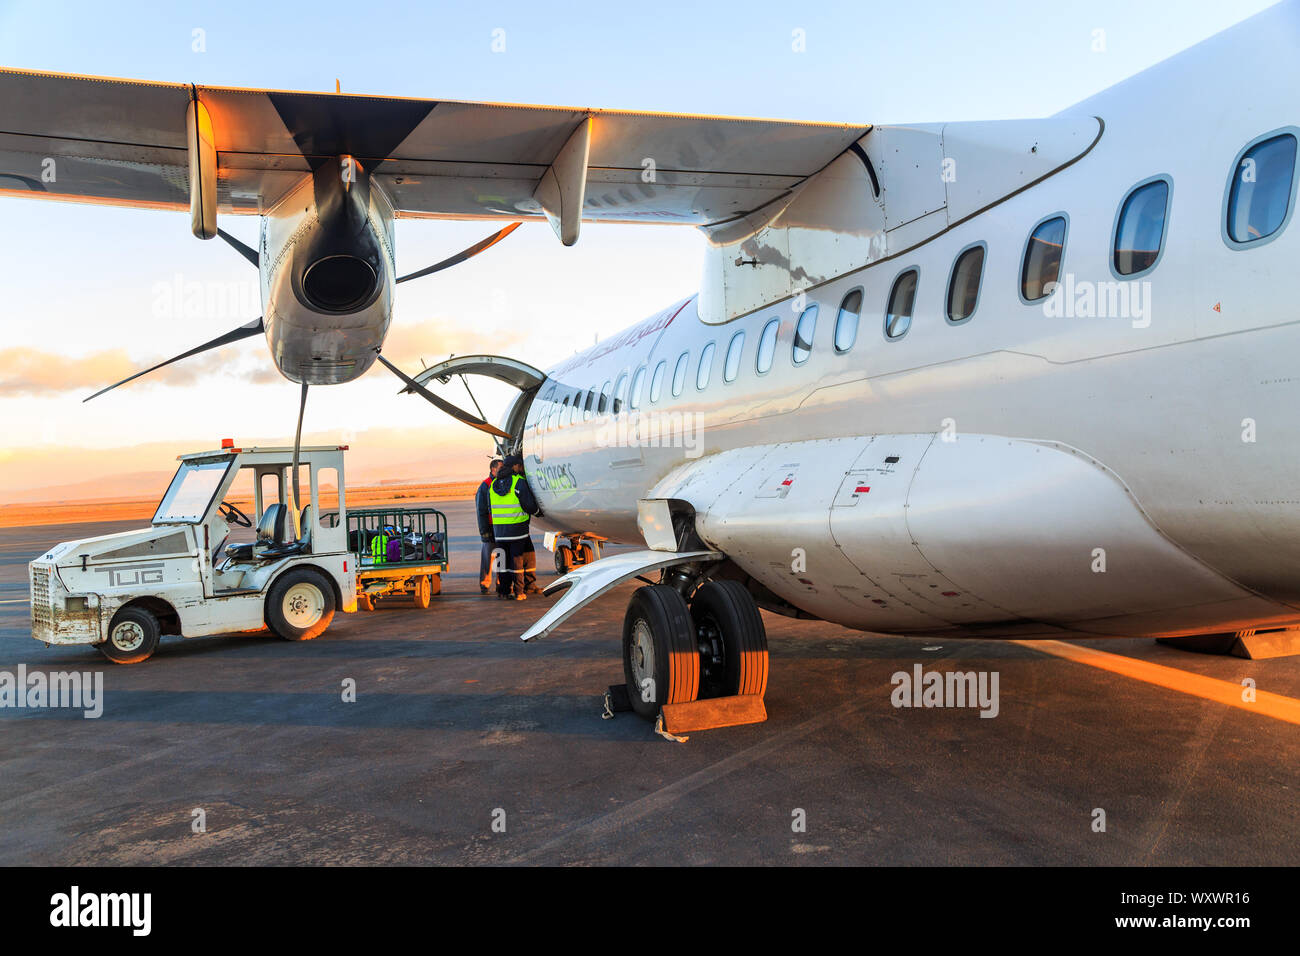 Ouarzazate, Morocco - Feb 28, 2016: agents of the airline charges passengers' luggages in the hold of the airliner at daybreak Stock Photo